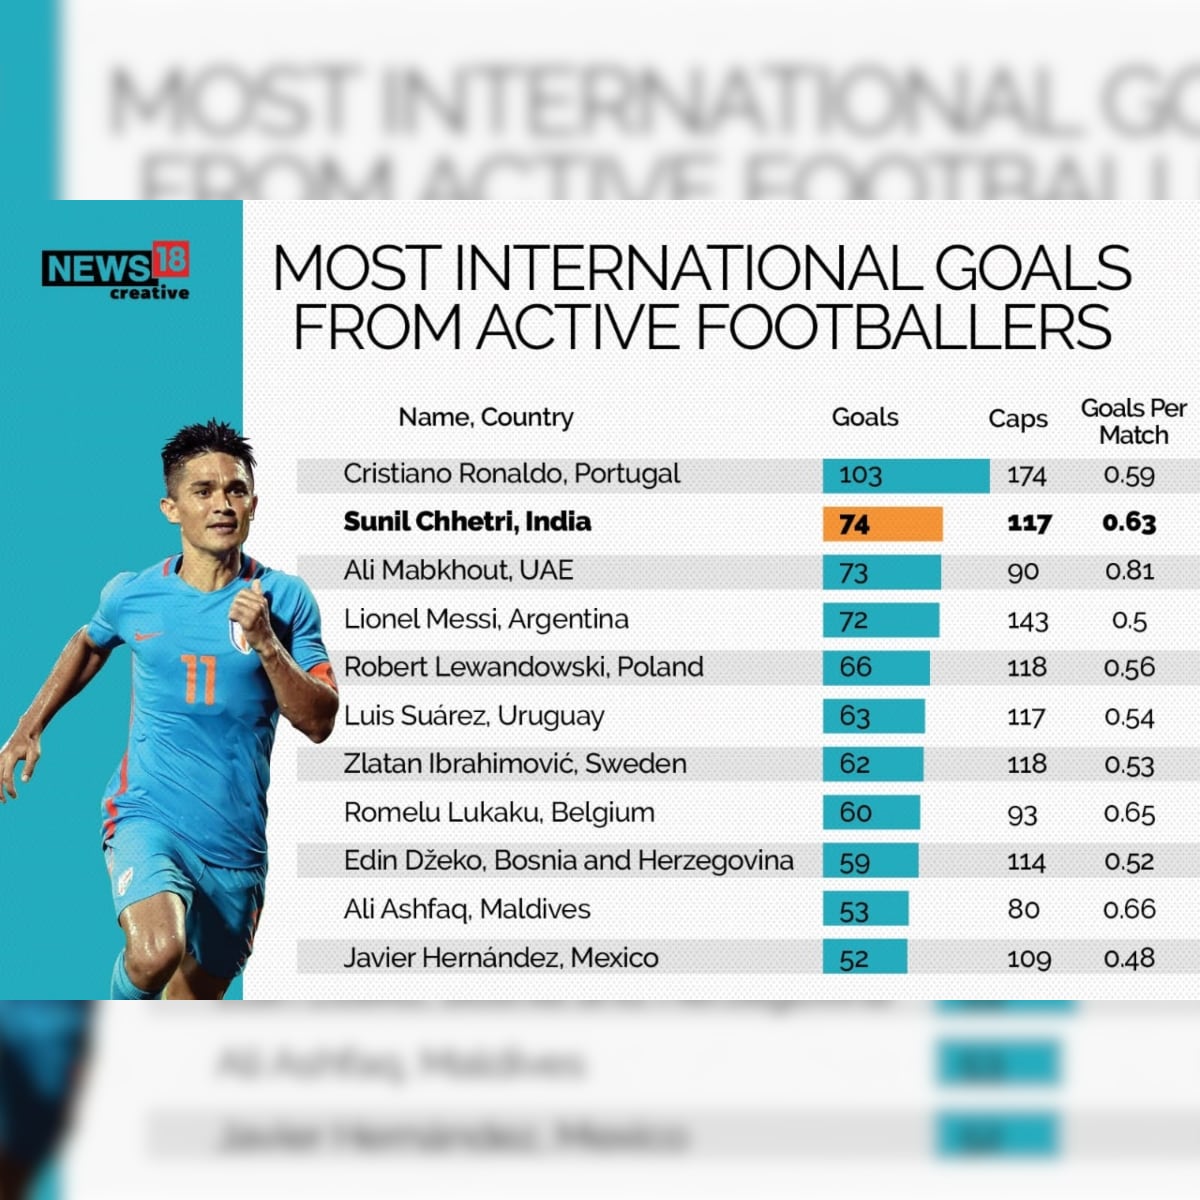 Top 10 Active Footballers With Most International Goals